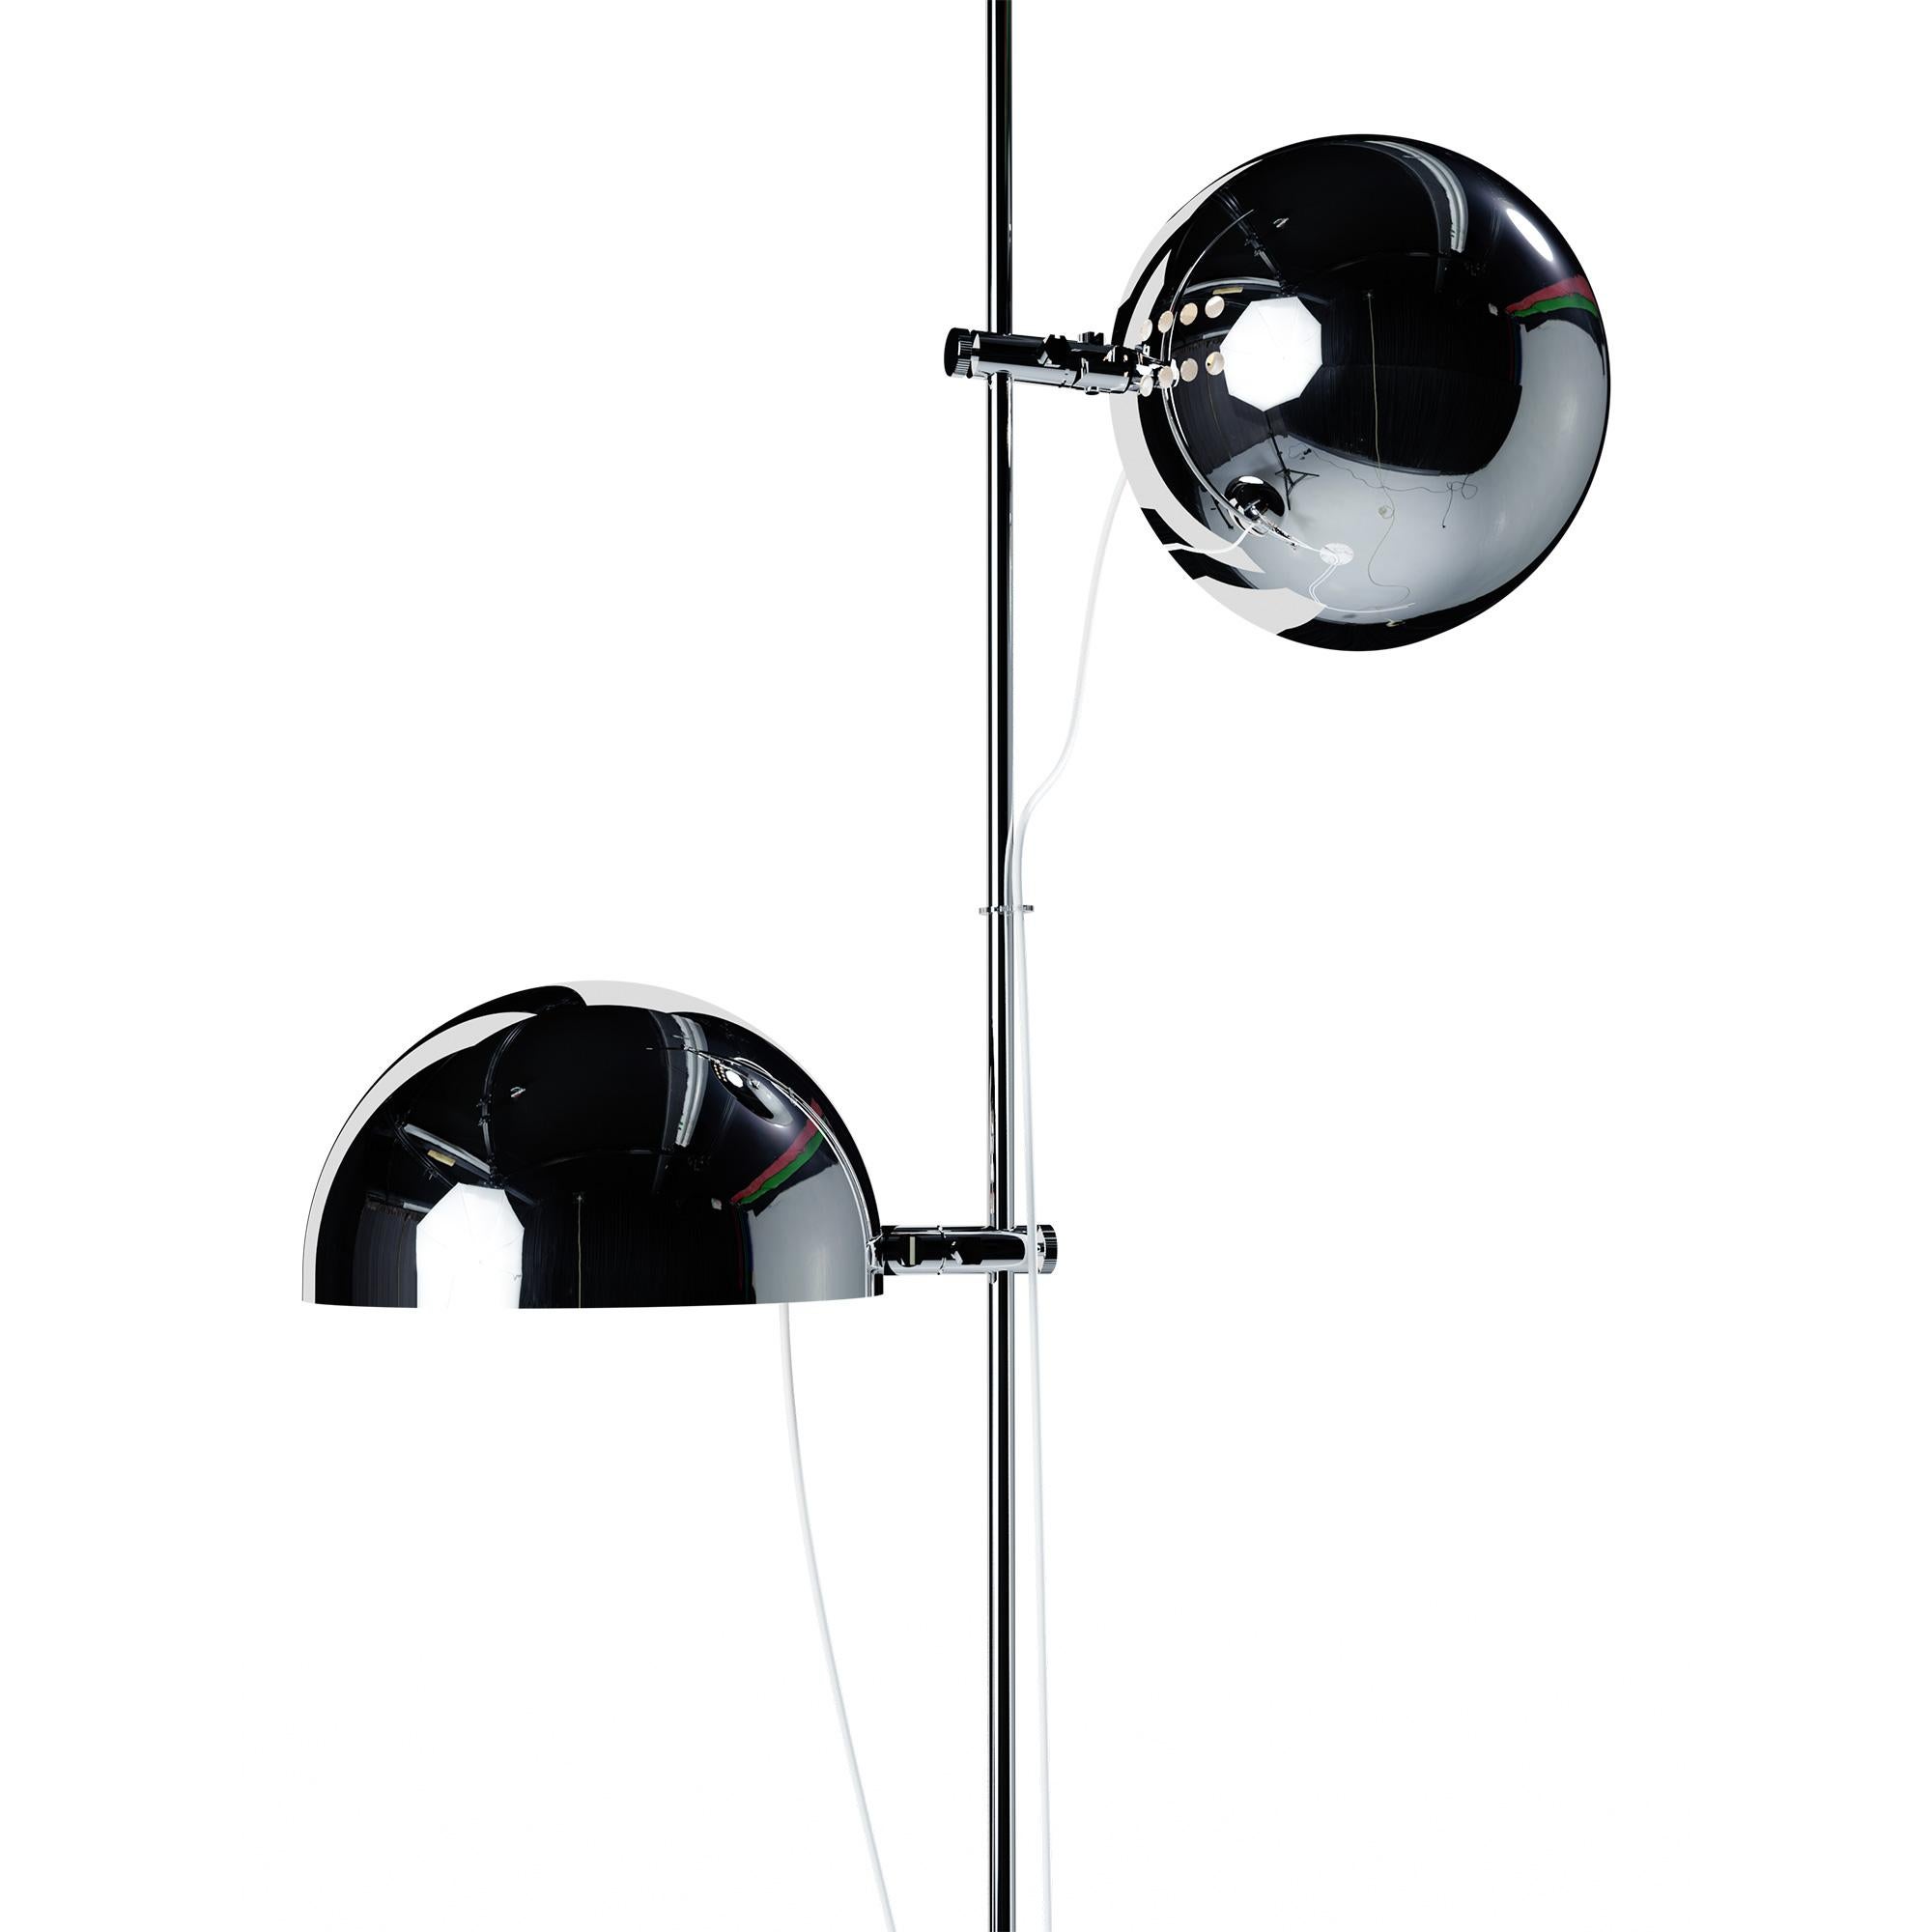 Chrome A23 Floor Lamp by Disderot
Limited Edition. 
Designed by Alain Richard
Dimensions: Ø 40 x H 150 cm.
Materials: Lacquered metal and chrome.

Delivered with authentication certificate. Made in France. Available in different color options.